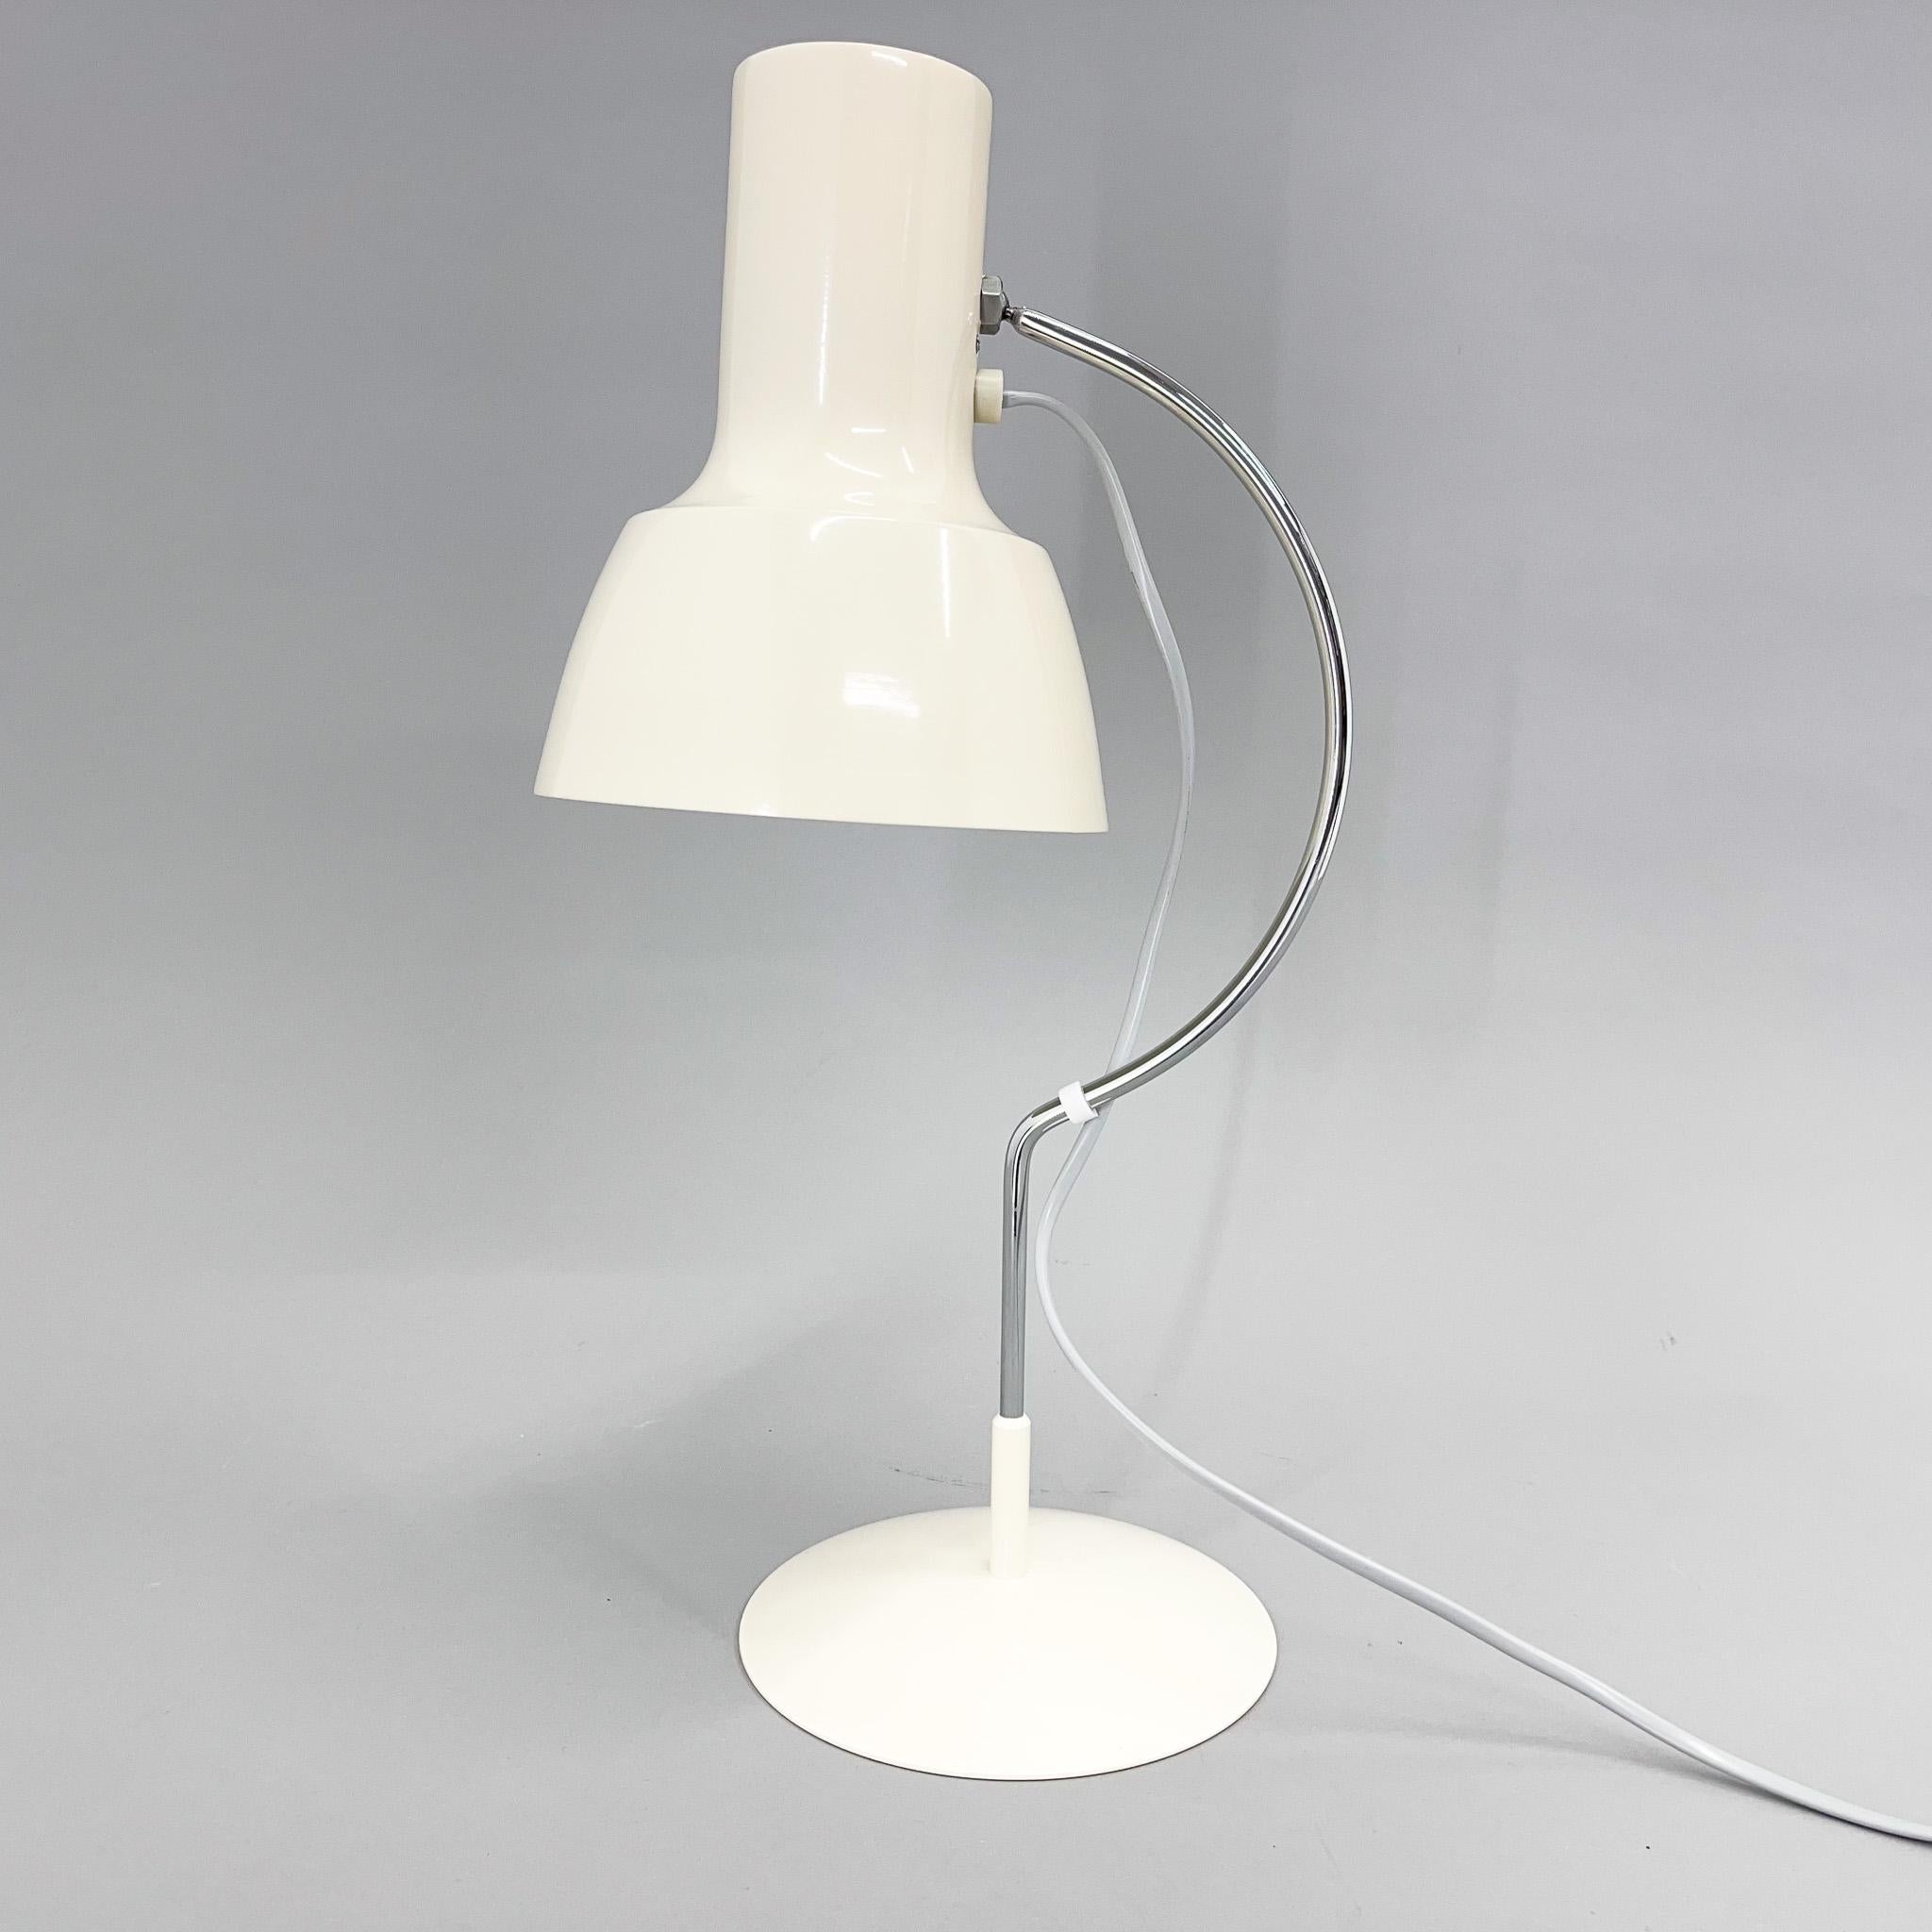 Mid Century Table Lamp by Josef Hůrka for Napako in Original Box, Never Used In Good Condition For Sale In Praha, CZ